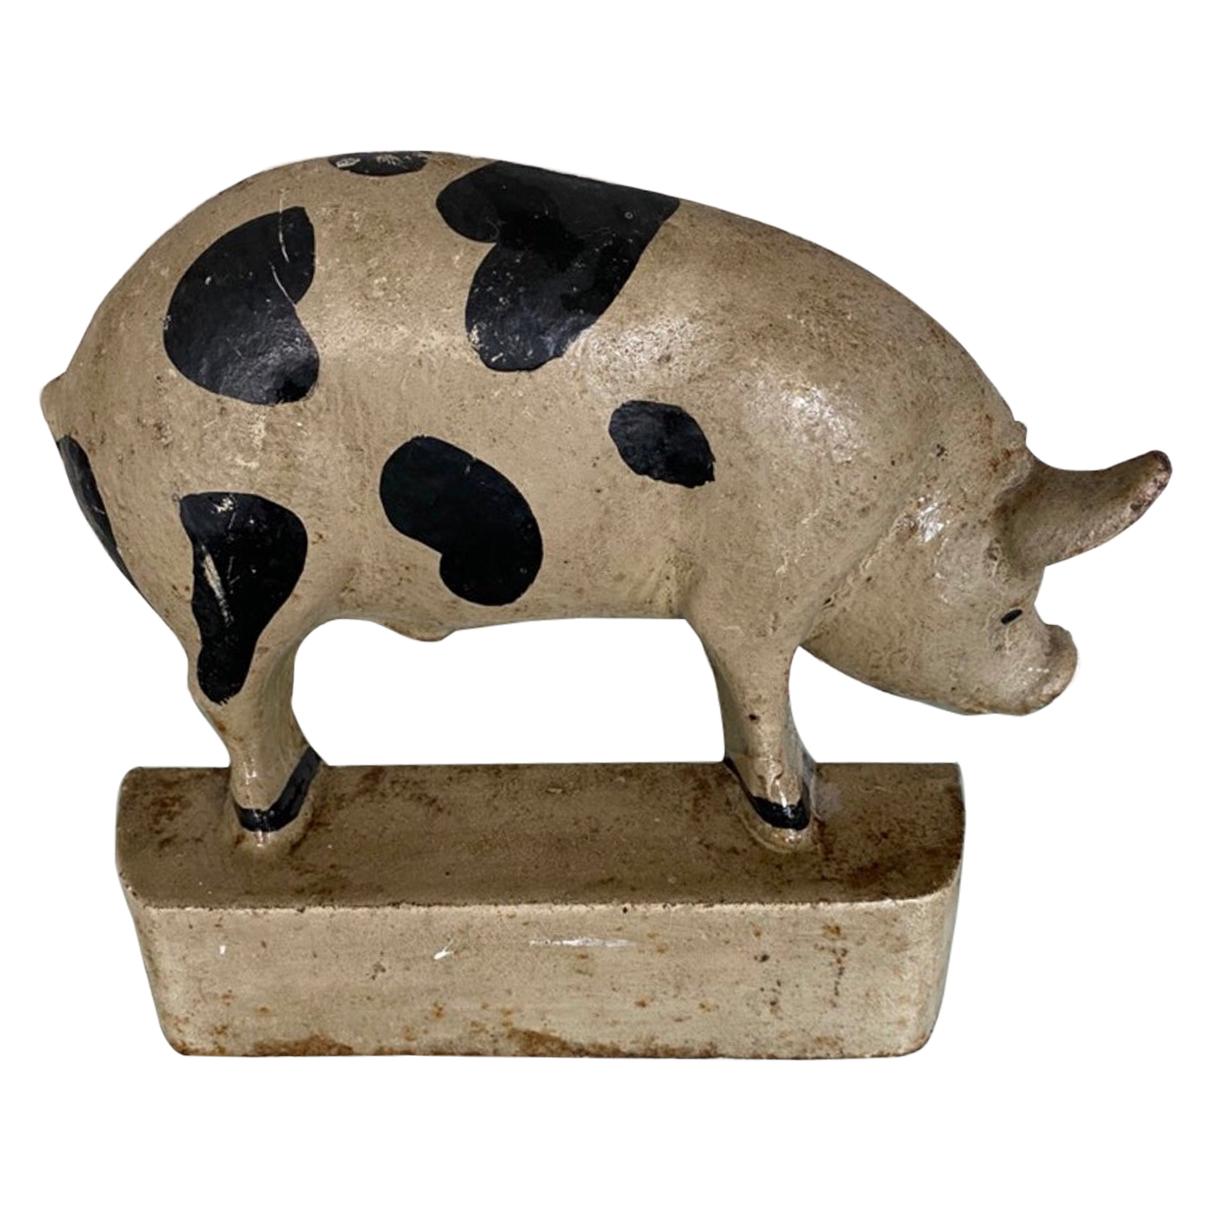 Large Reproduction Cast Iron Flying Pig Statue 11" Door Stop 0170-13601 